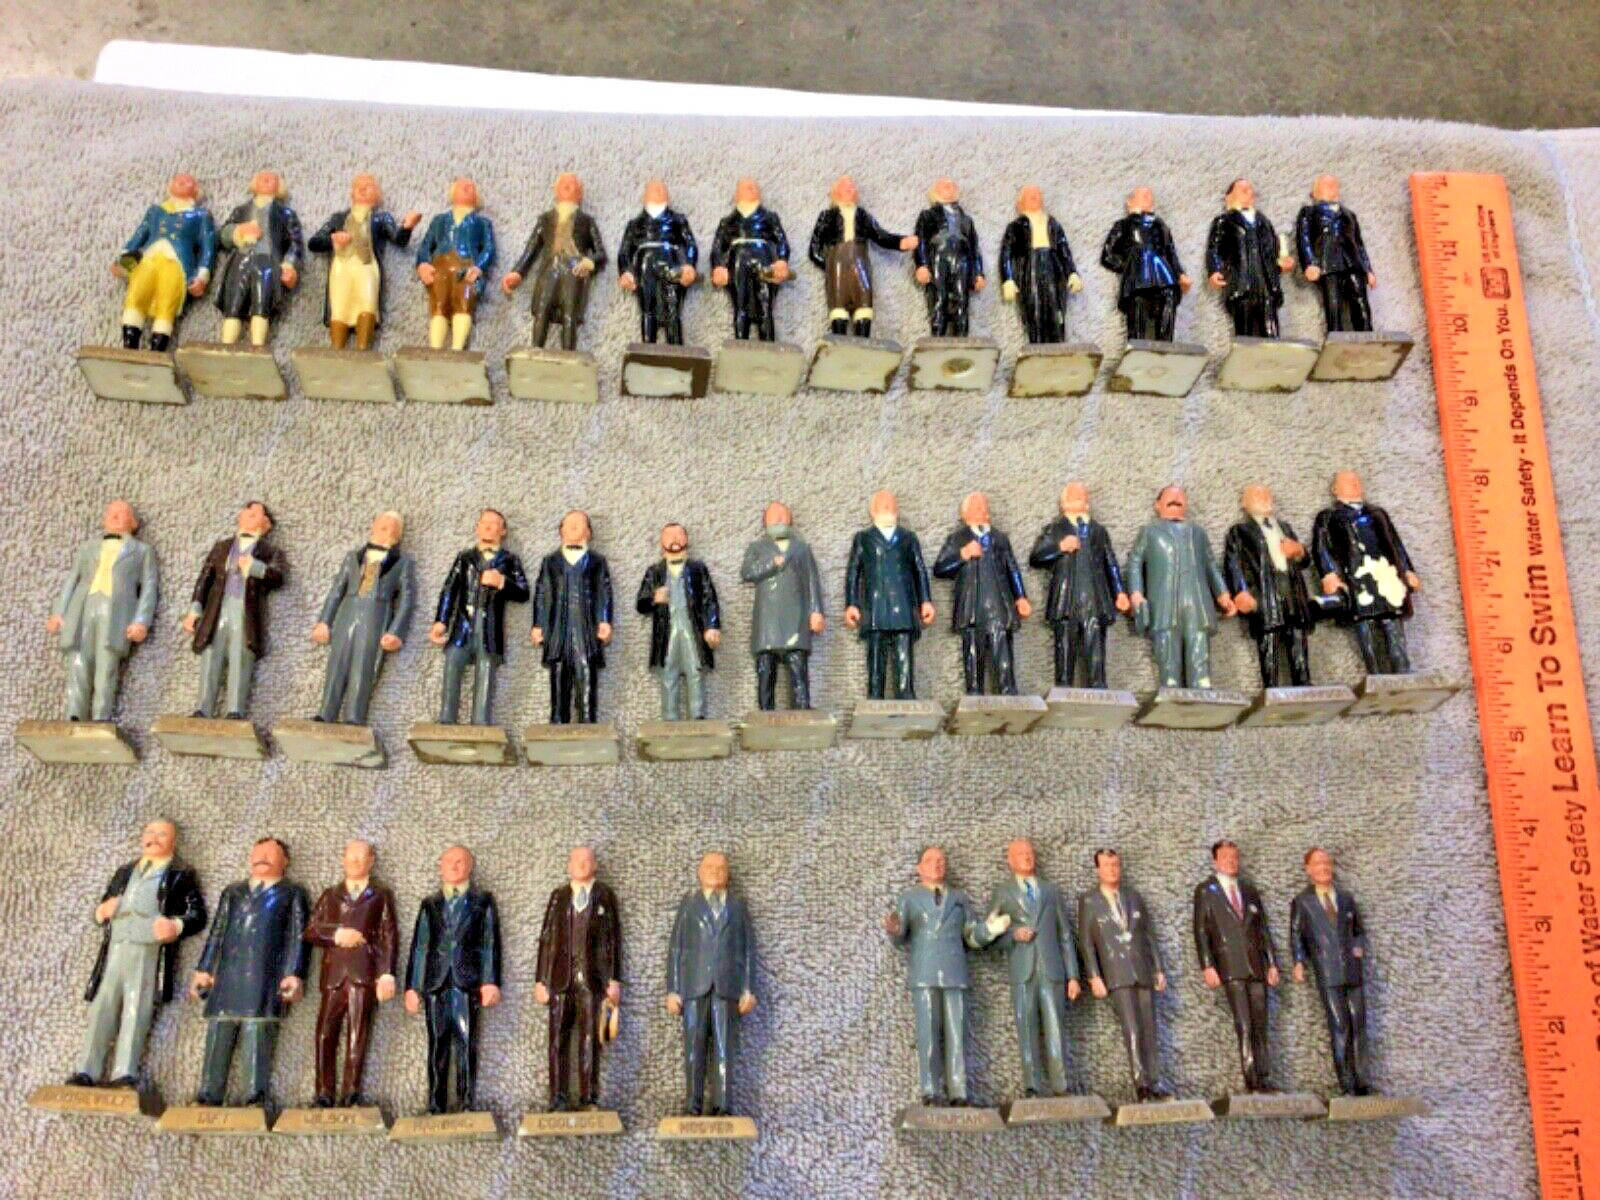 Vintage Marx president figures 37 missing #32 FDR given away by Jewel Foods